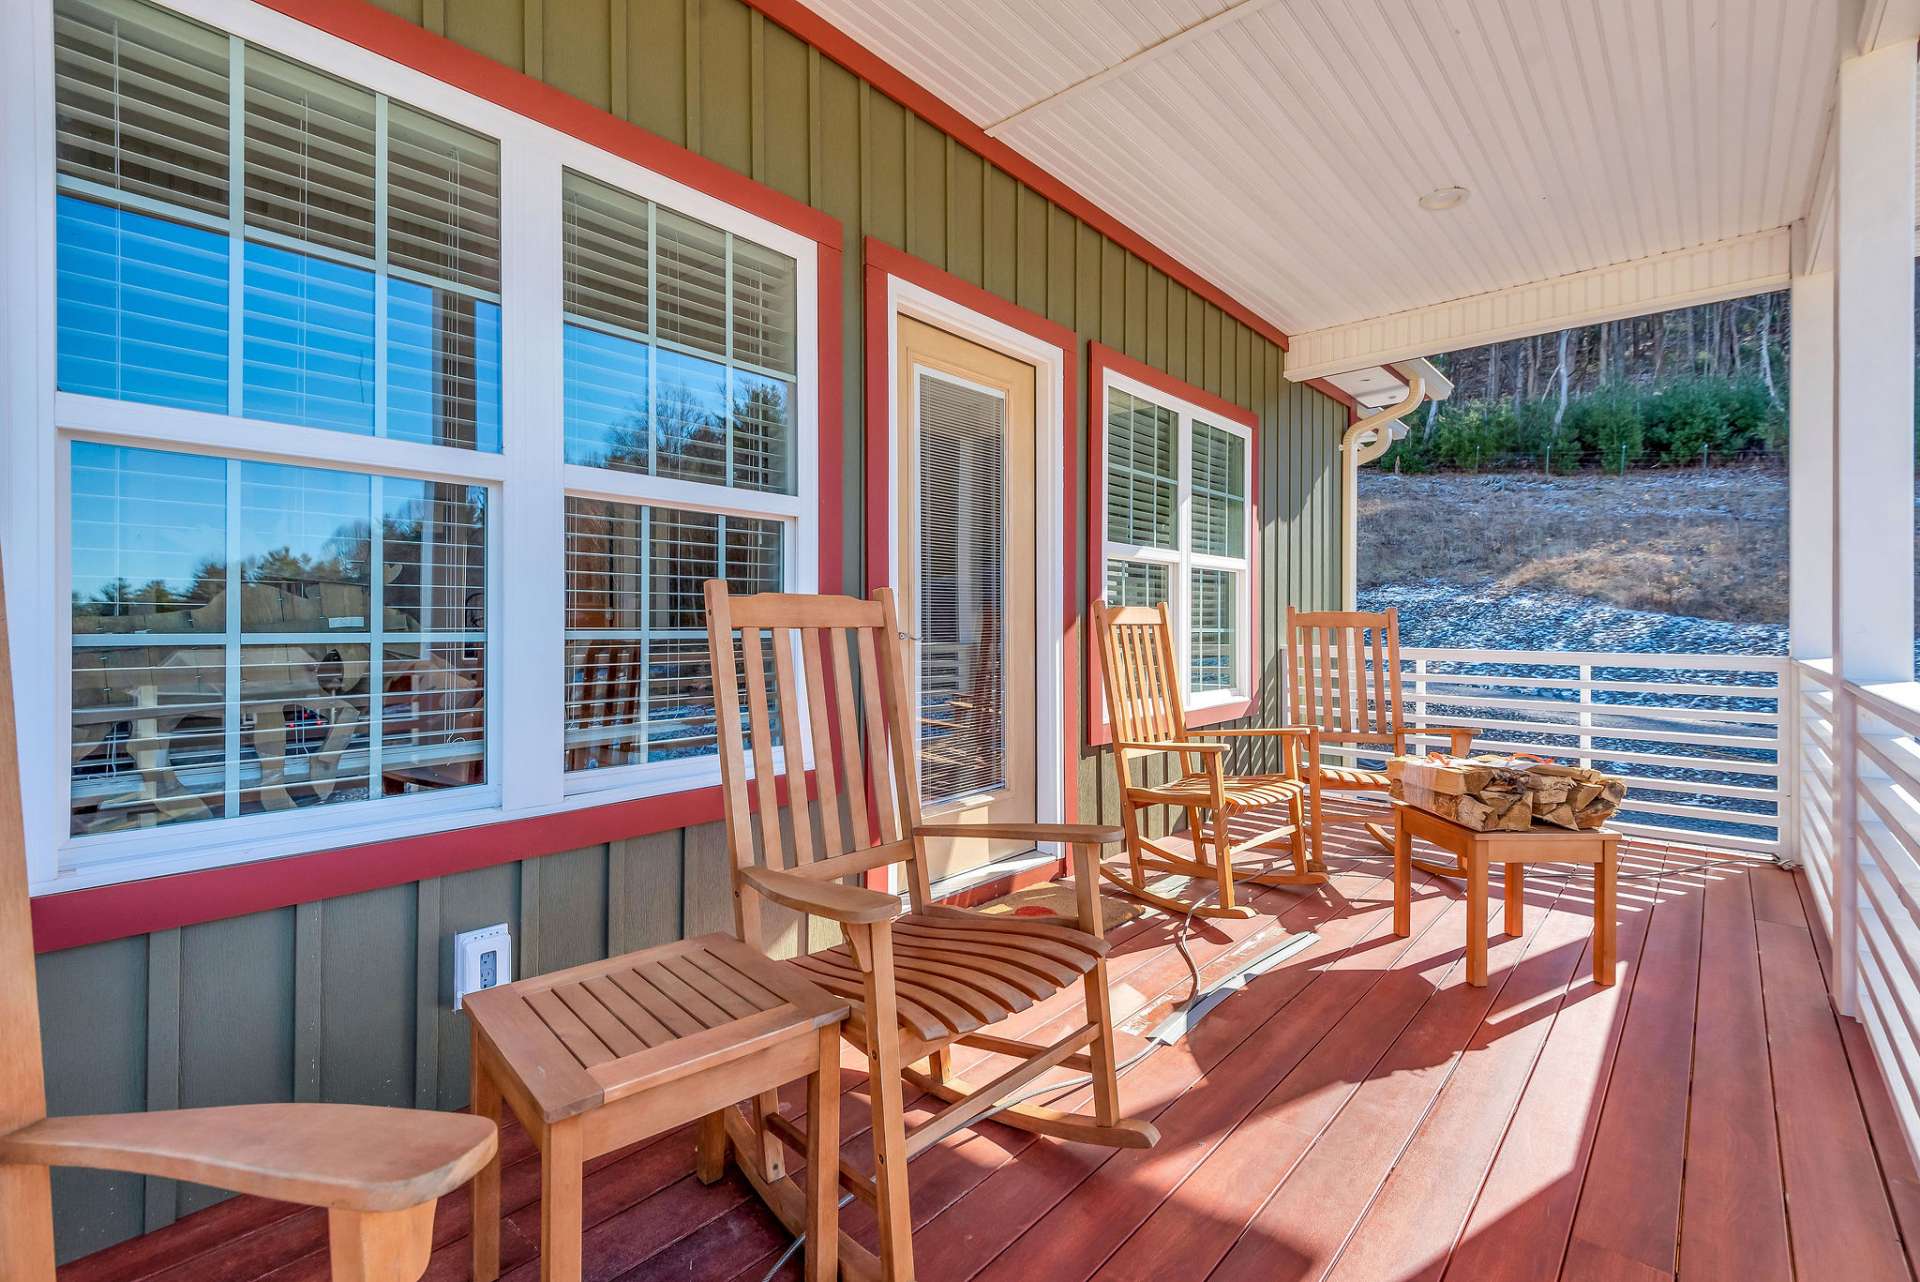 The covered porch offers additional outdoor living space in the warmer months.